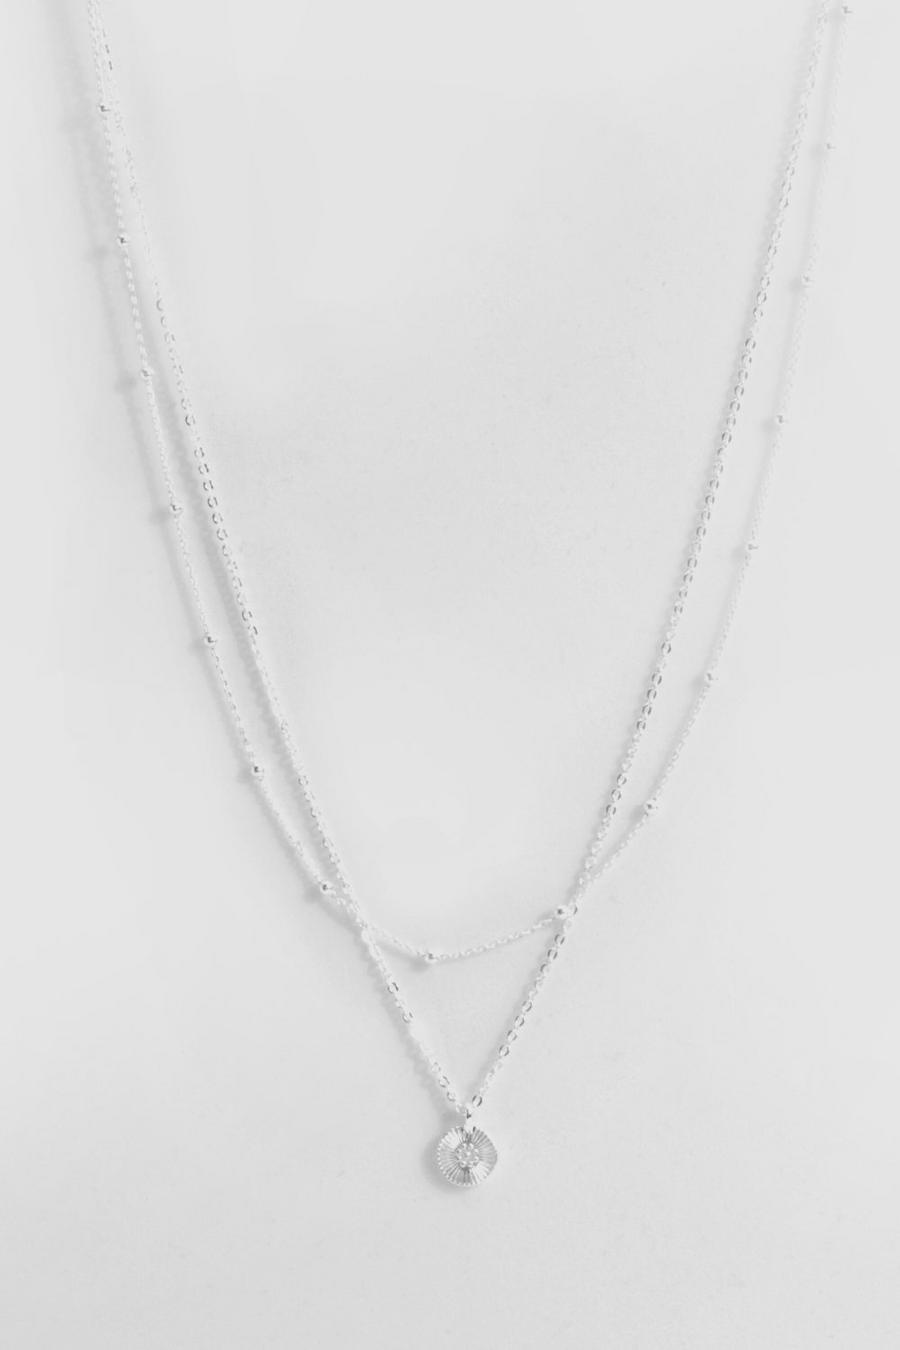 Silver Delicate Double Layered Pendant Necklace 